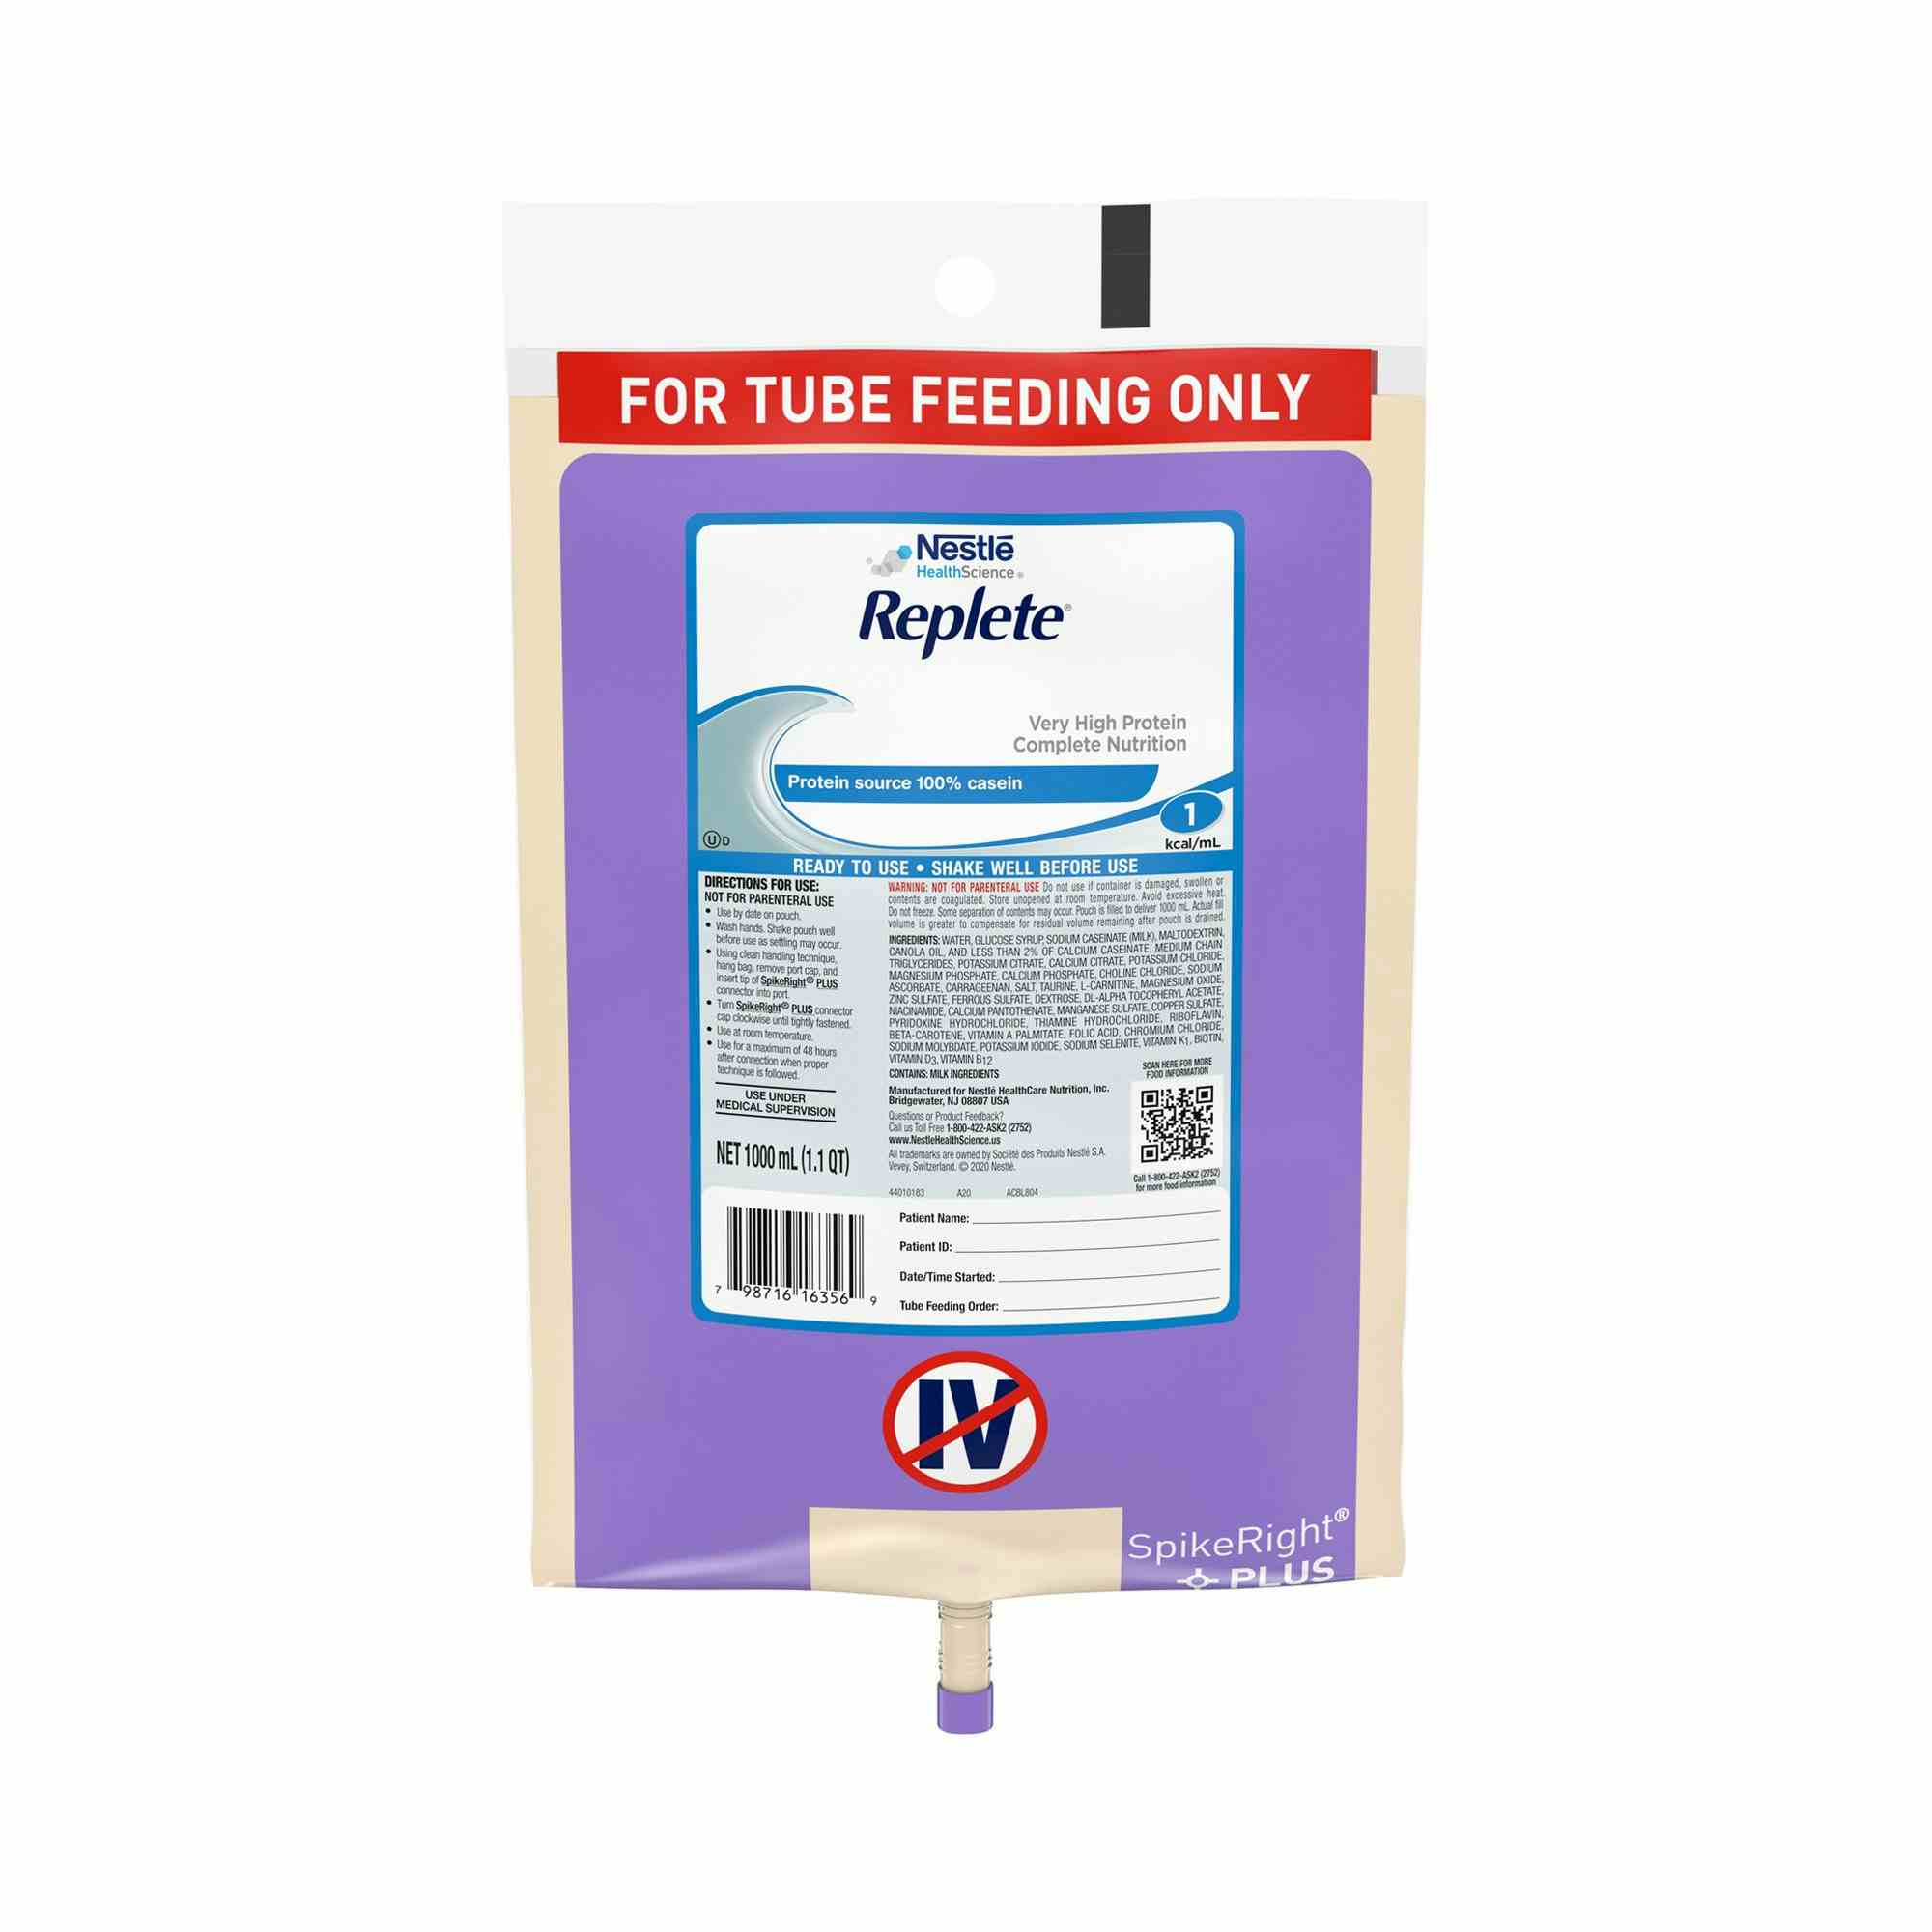 Nestle HealthScience Replete Very High Protein Complete Nutrition Tube Feeding Formula, 33.8 oz. , 10798716263563, Case of 6